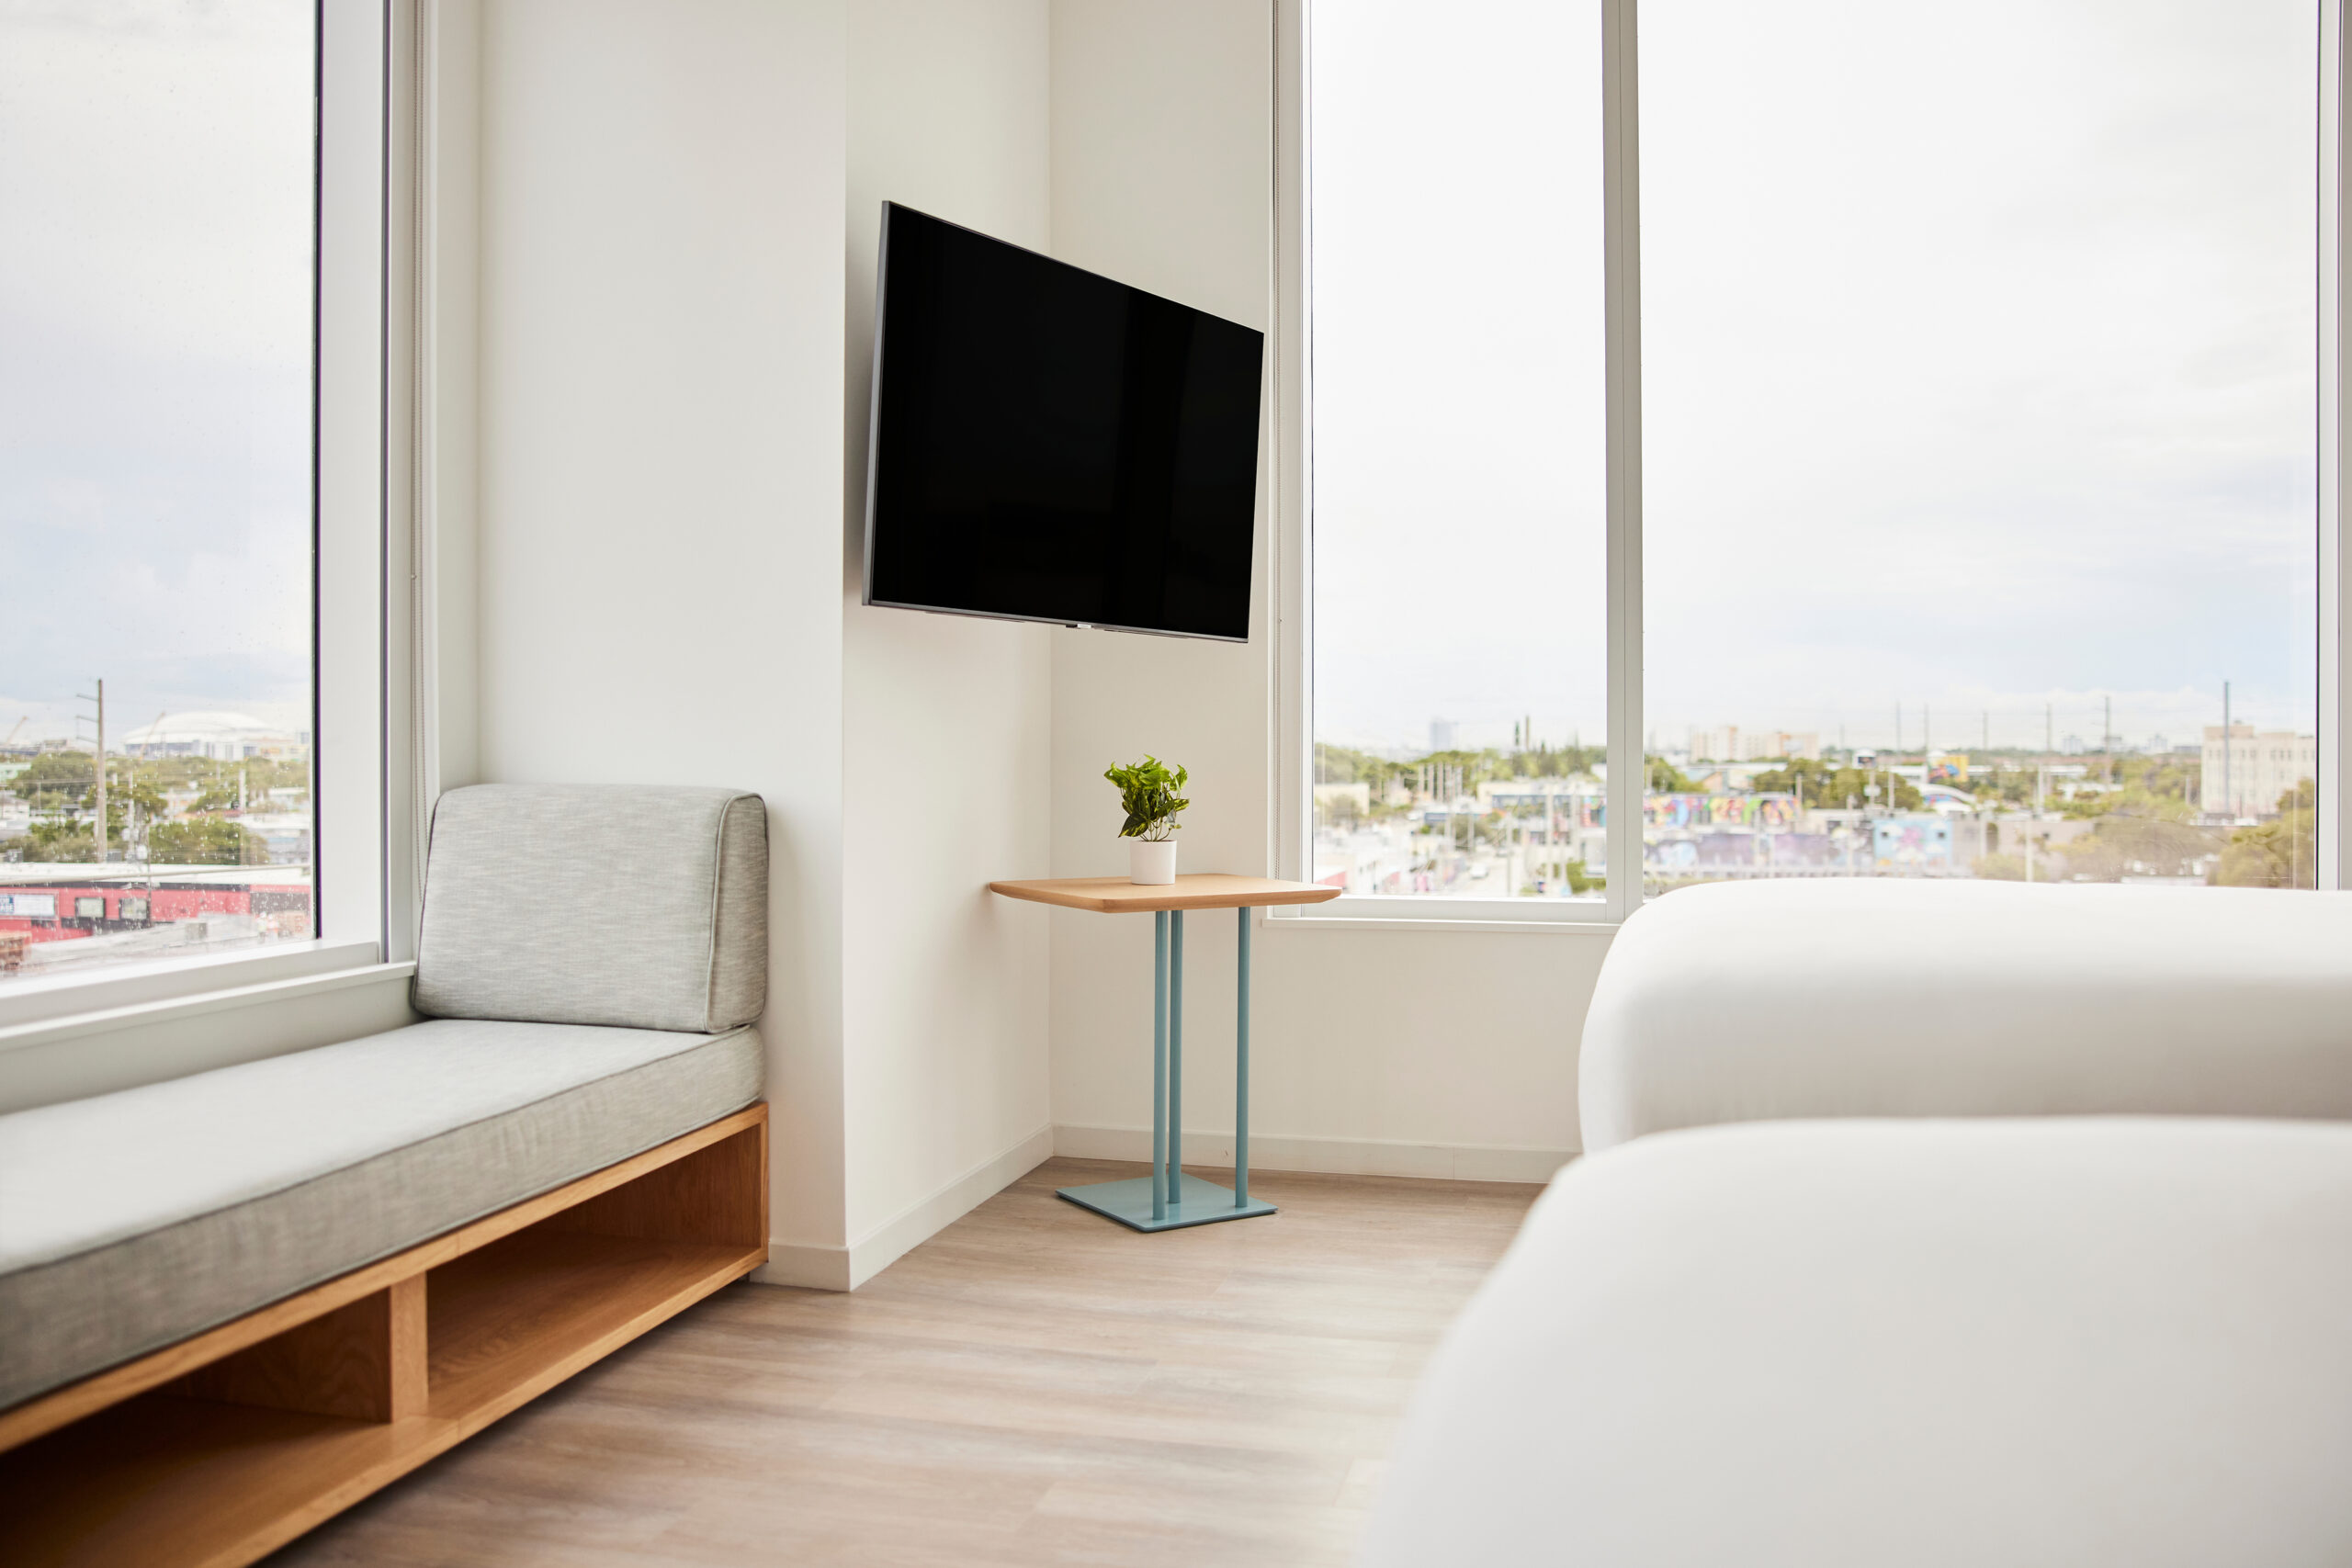 Arlo Wynwood Corner Two Double hotel room beds and television